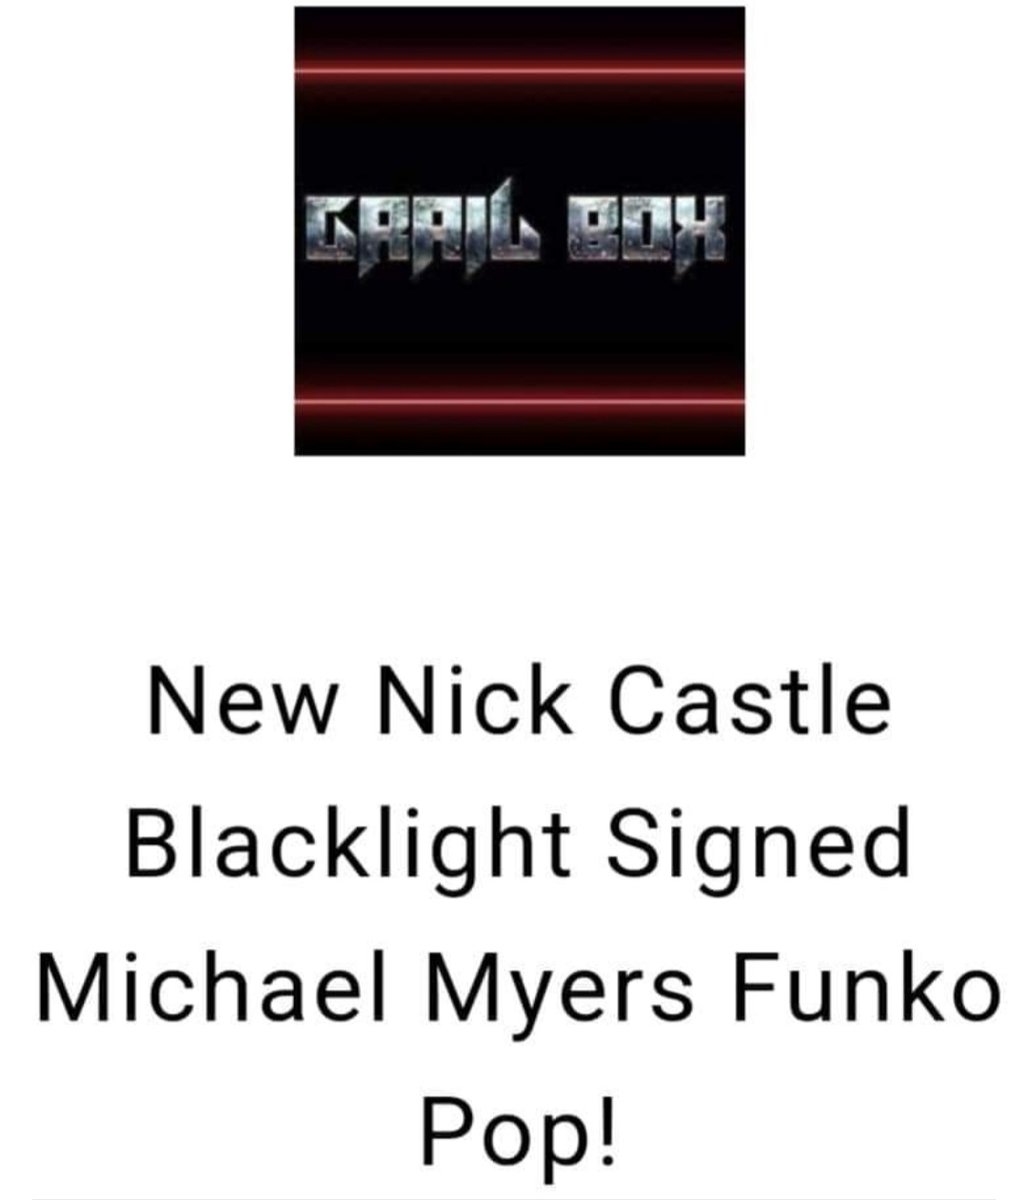 From the Grail Box, a Beckett authenticated autographed Funko pop from Nick Castle with 'The Shape' and 'Halloween 78' inscriptions that all glow in the dark under a black light #thegrailbox #funko #funkopop #nickcastle #theshape #halloween #backlight